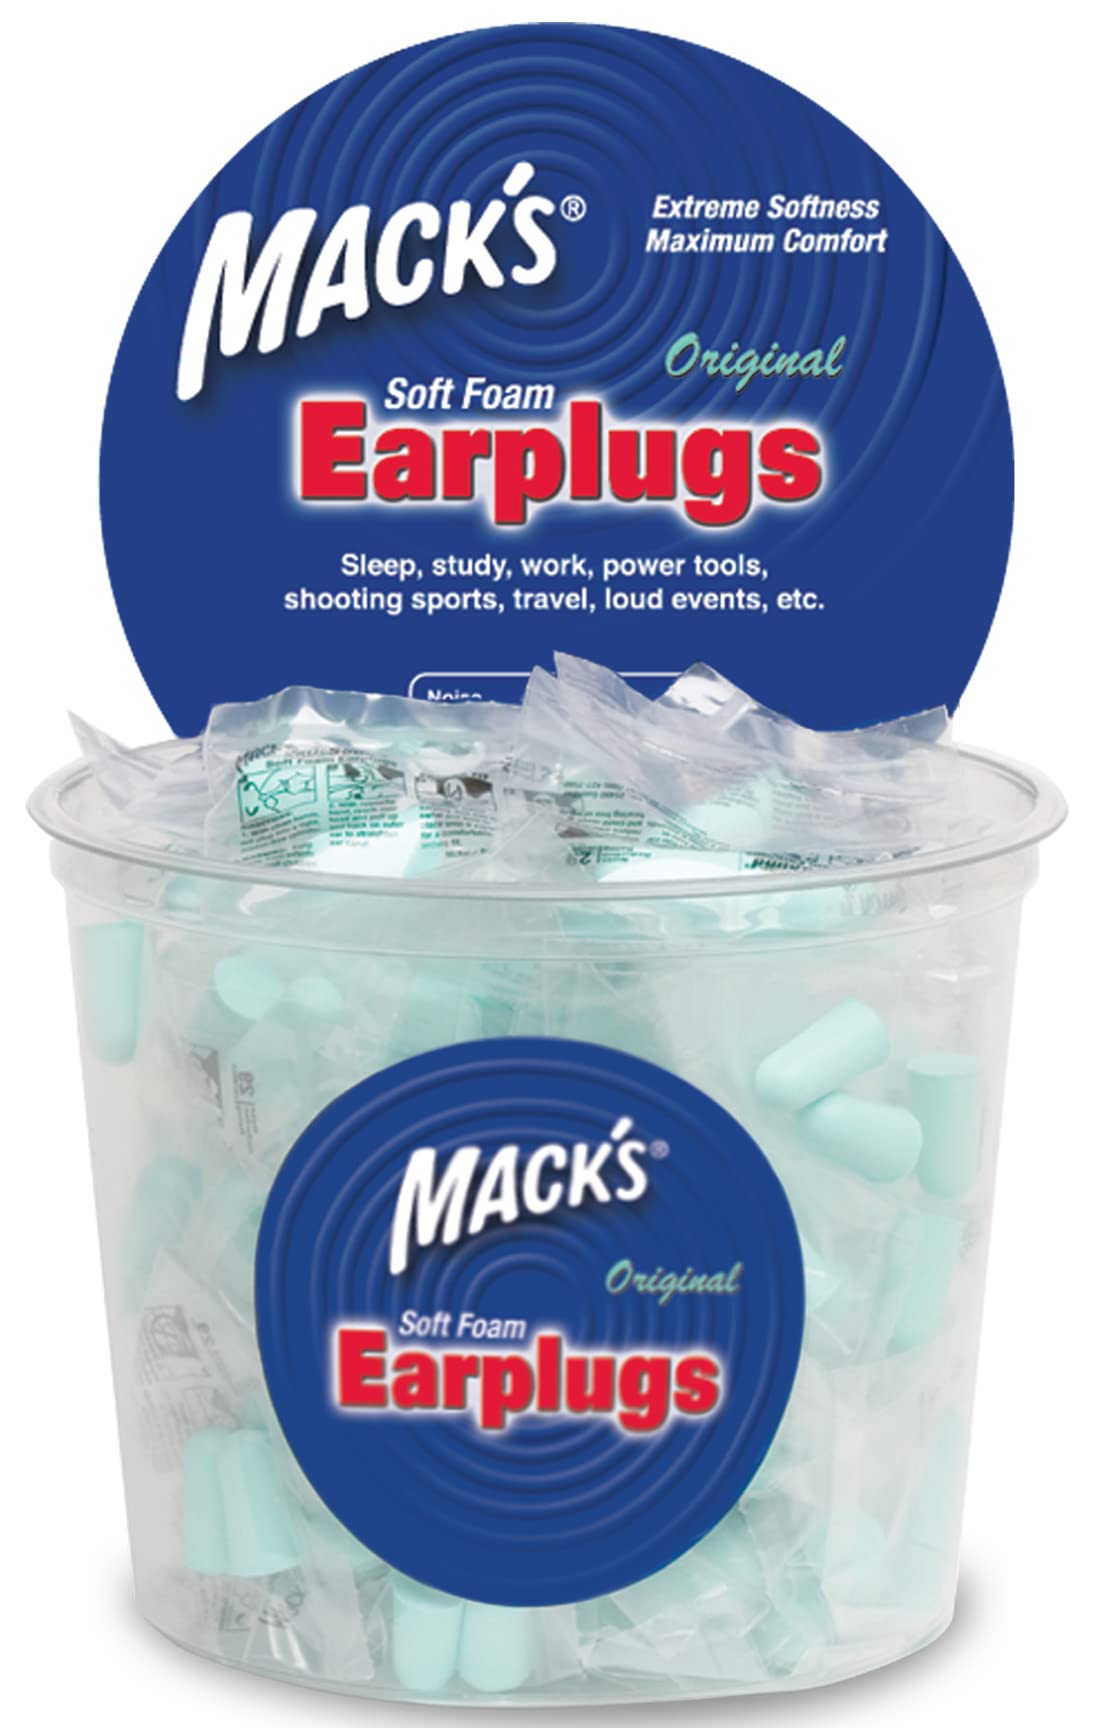 Mack's Original Soft Foam Earplugs -100 Pair - Individually Wrapped - 32dB Highest NRR, Comfortable Ear Plugs for Sleeping, Snoring, Work, Travel and Loud Events